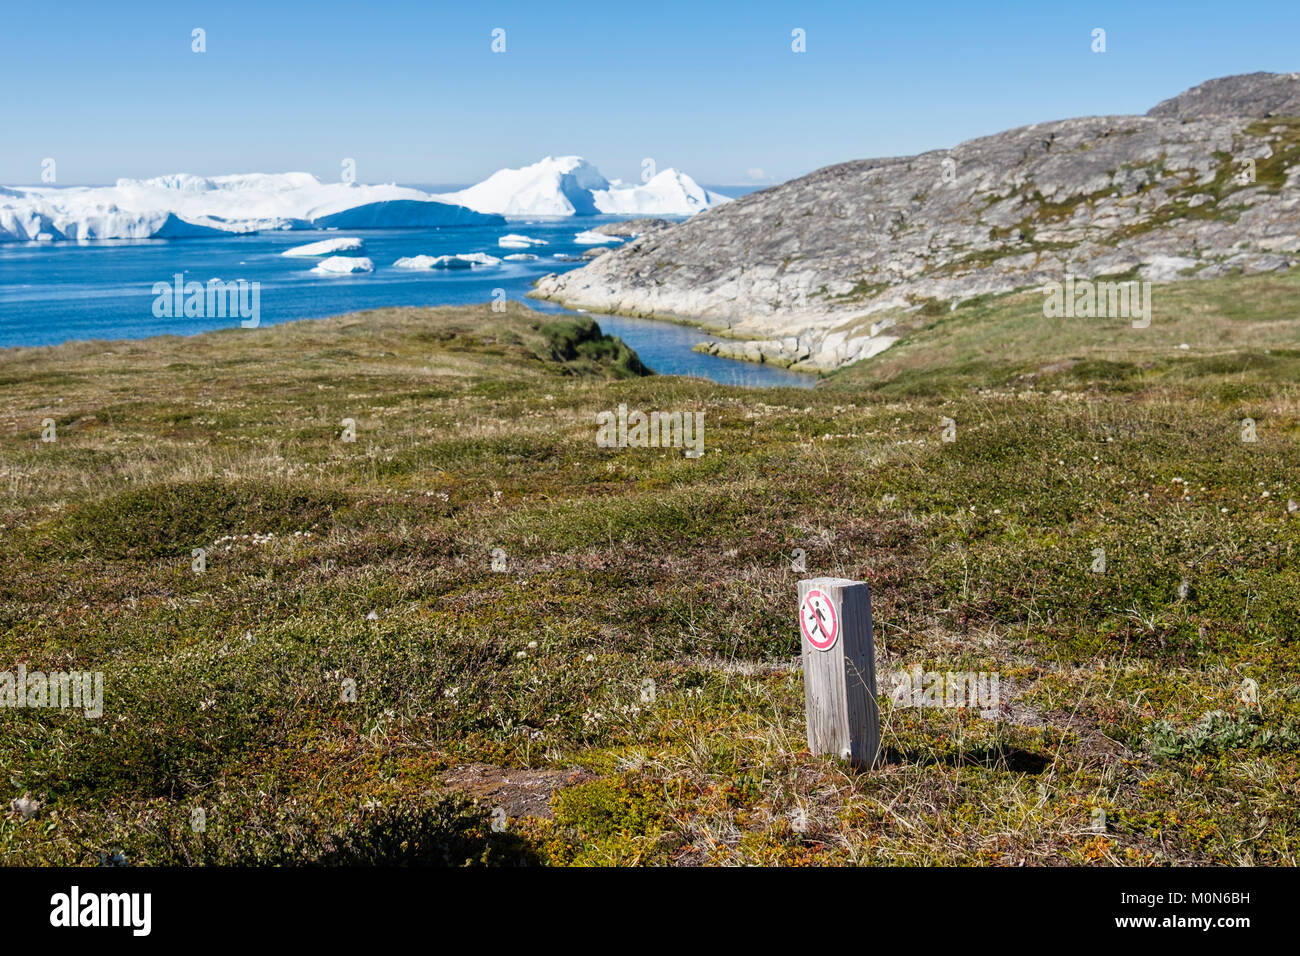 'No Walking' sign to protect the Sermermiut Inuit settlement archaeological site and Arctic Tundra habitat around Ilulissat Icefjord. Greenland Stock Photo